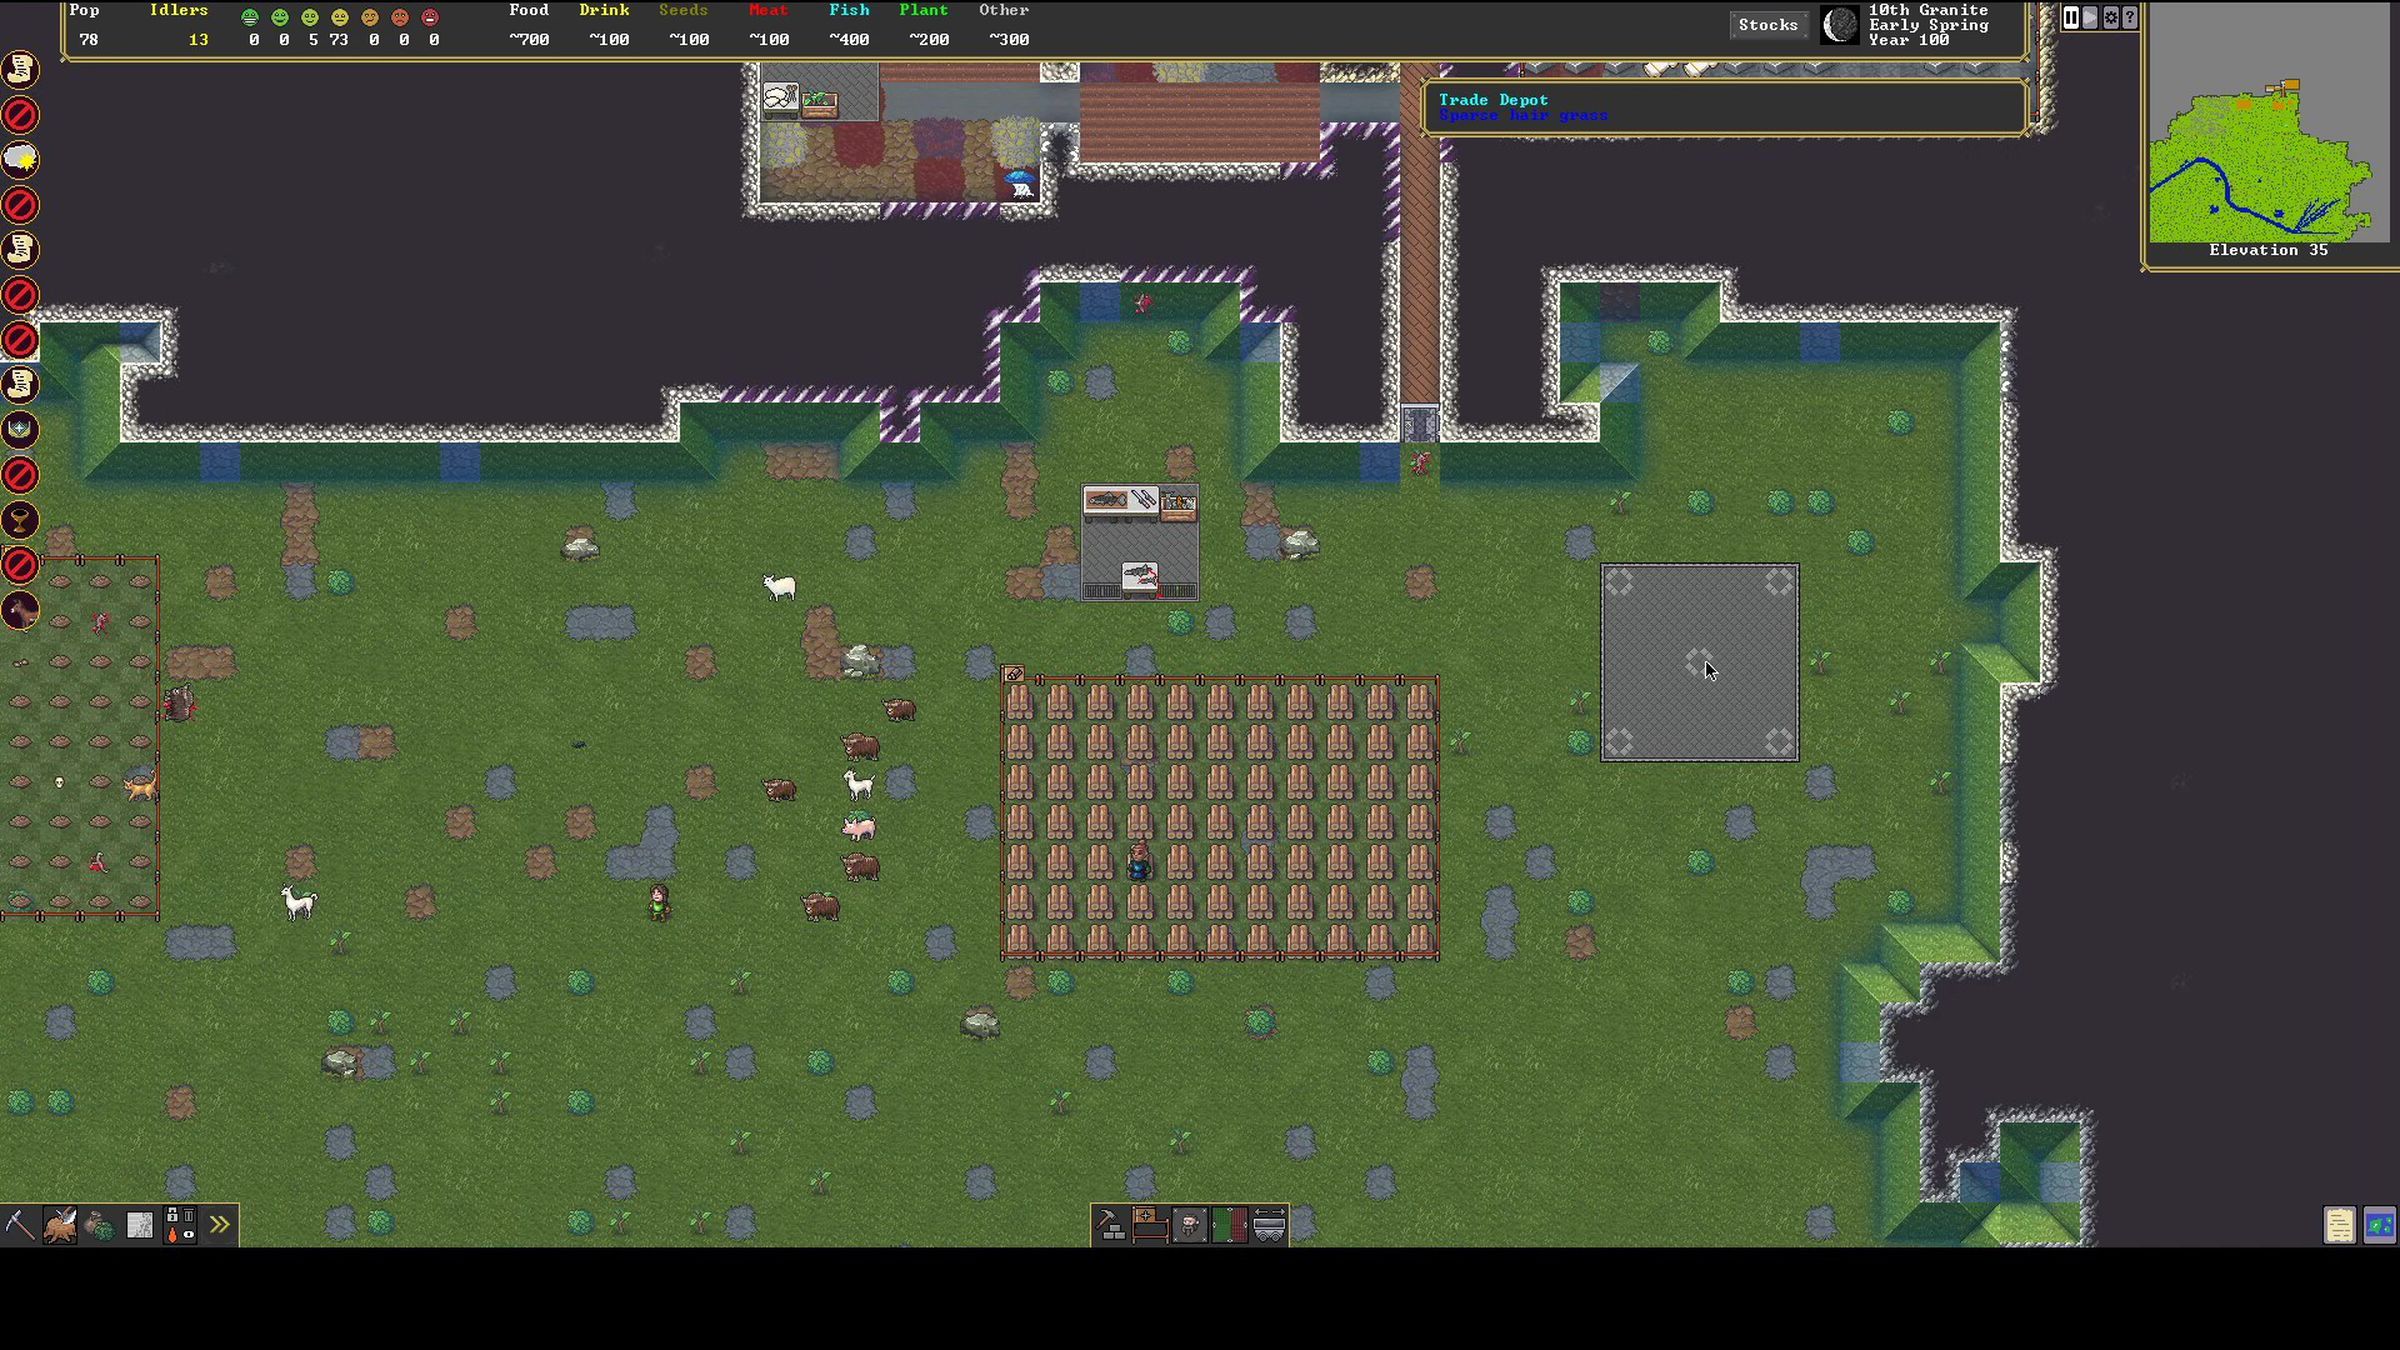 A screenshot of the new version of Dwarf Fortress.